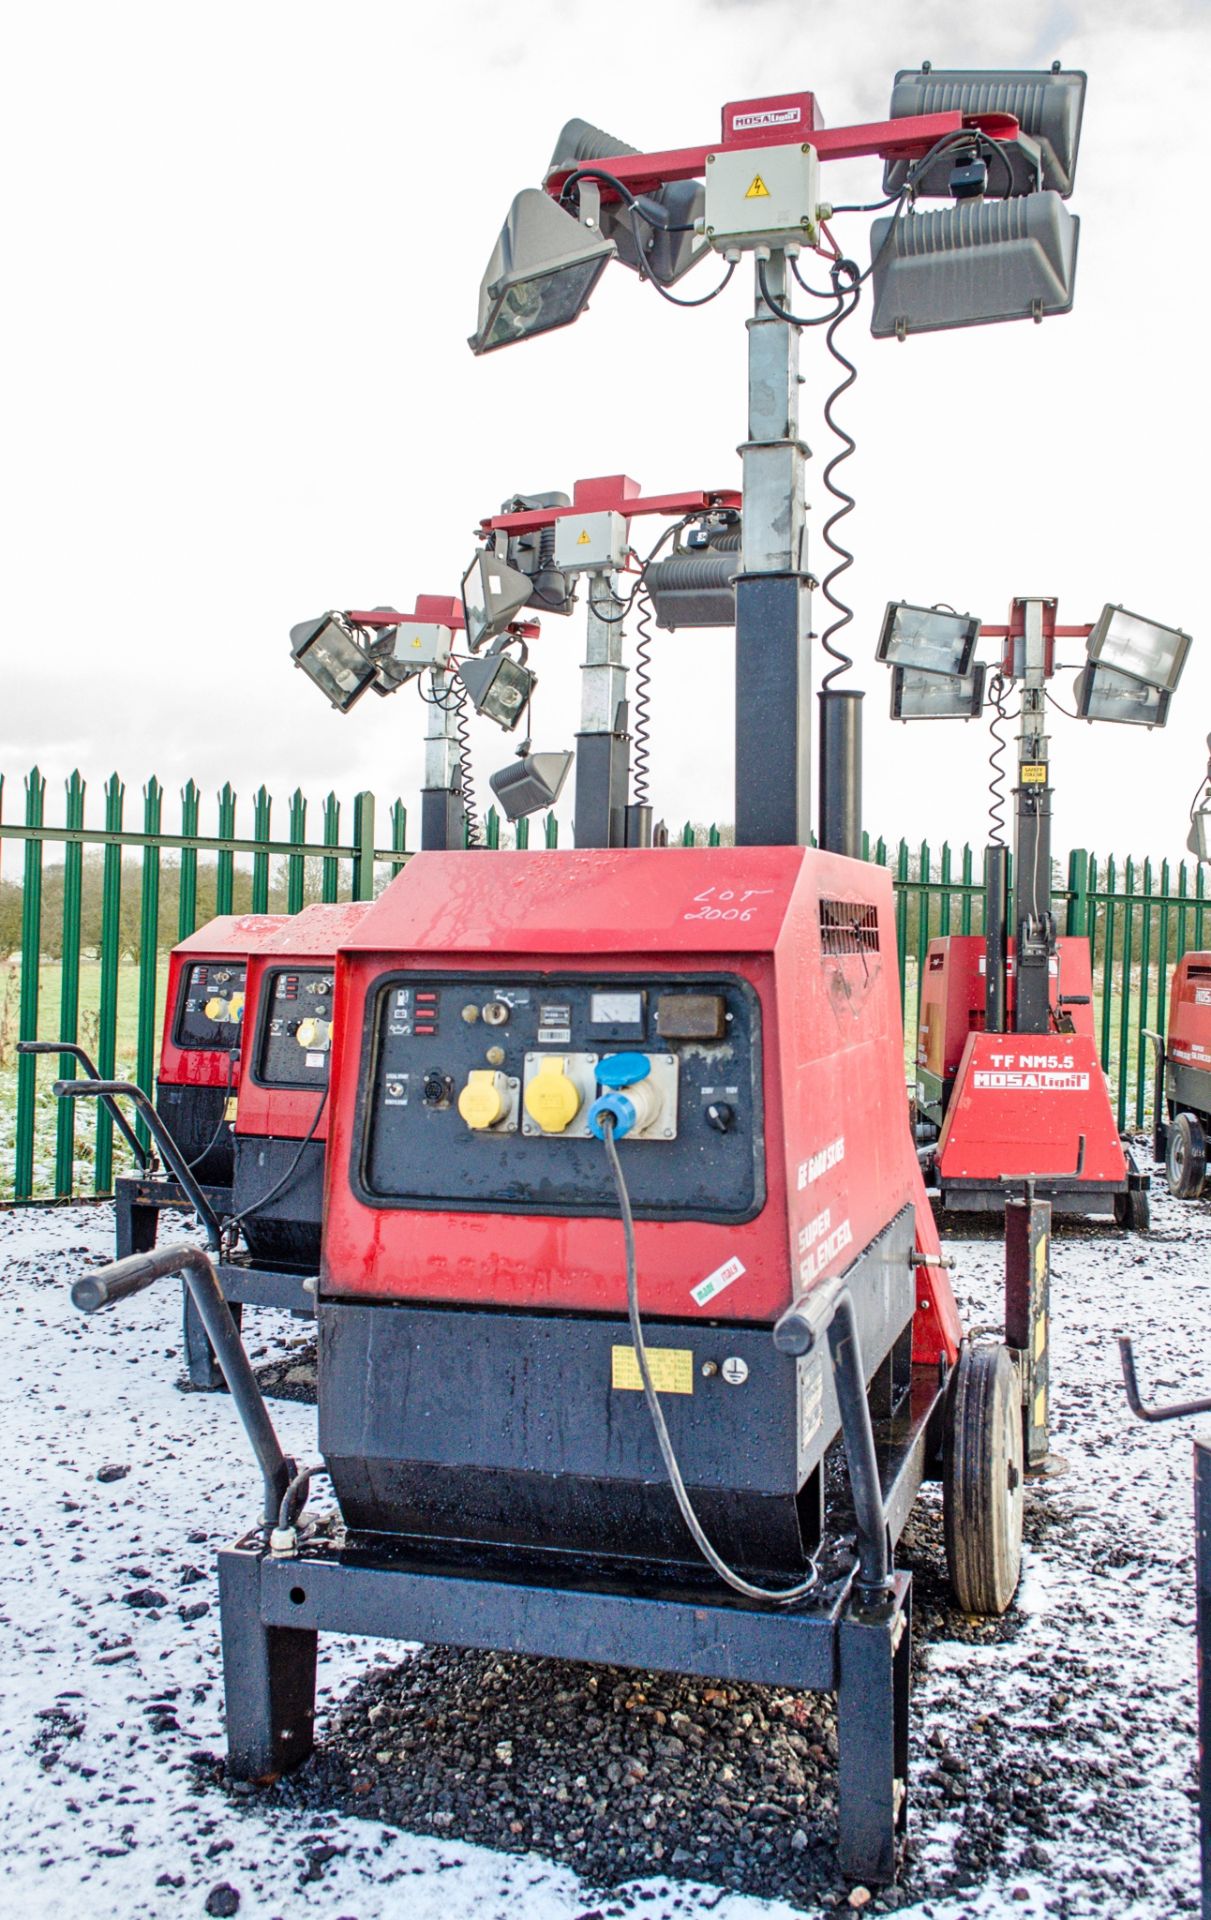 Mosa GE 6000 SX/GS diesel driven tower light/generator Year: 2015 Recorded Hours: 1326 MOSA-0020